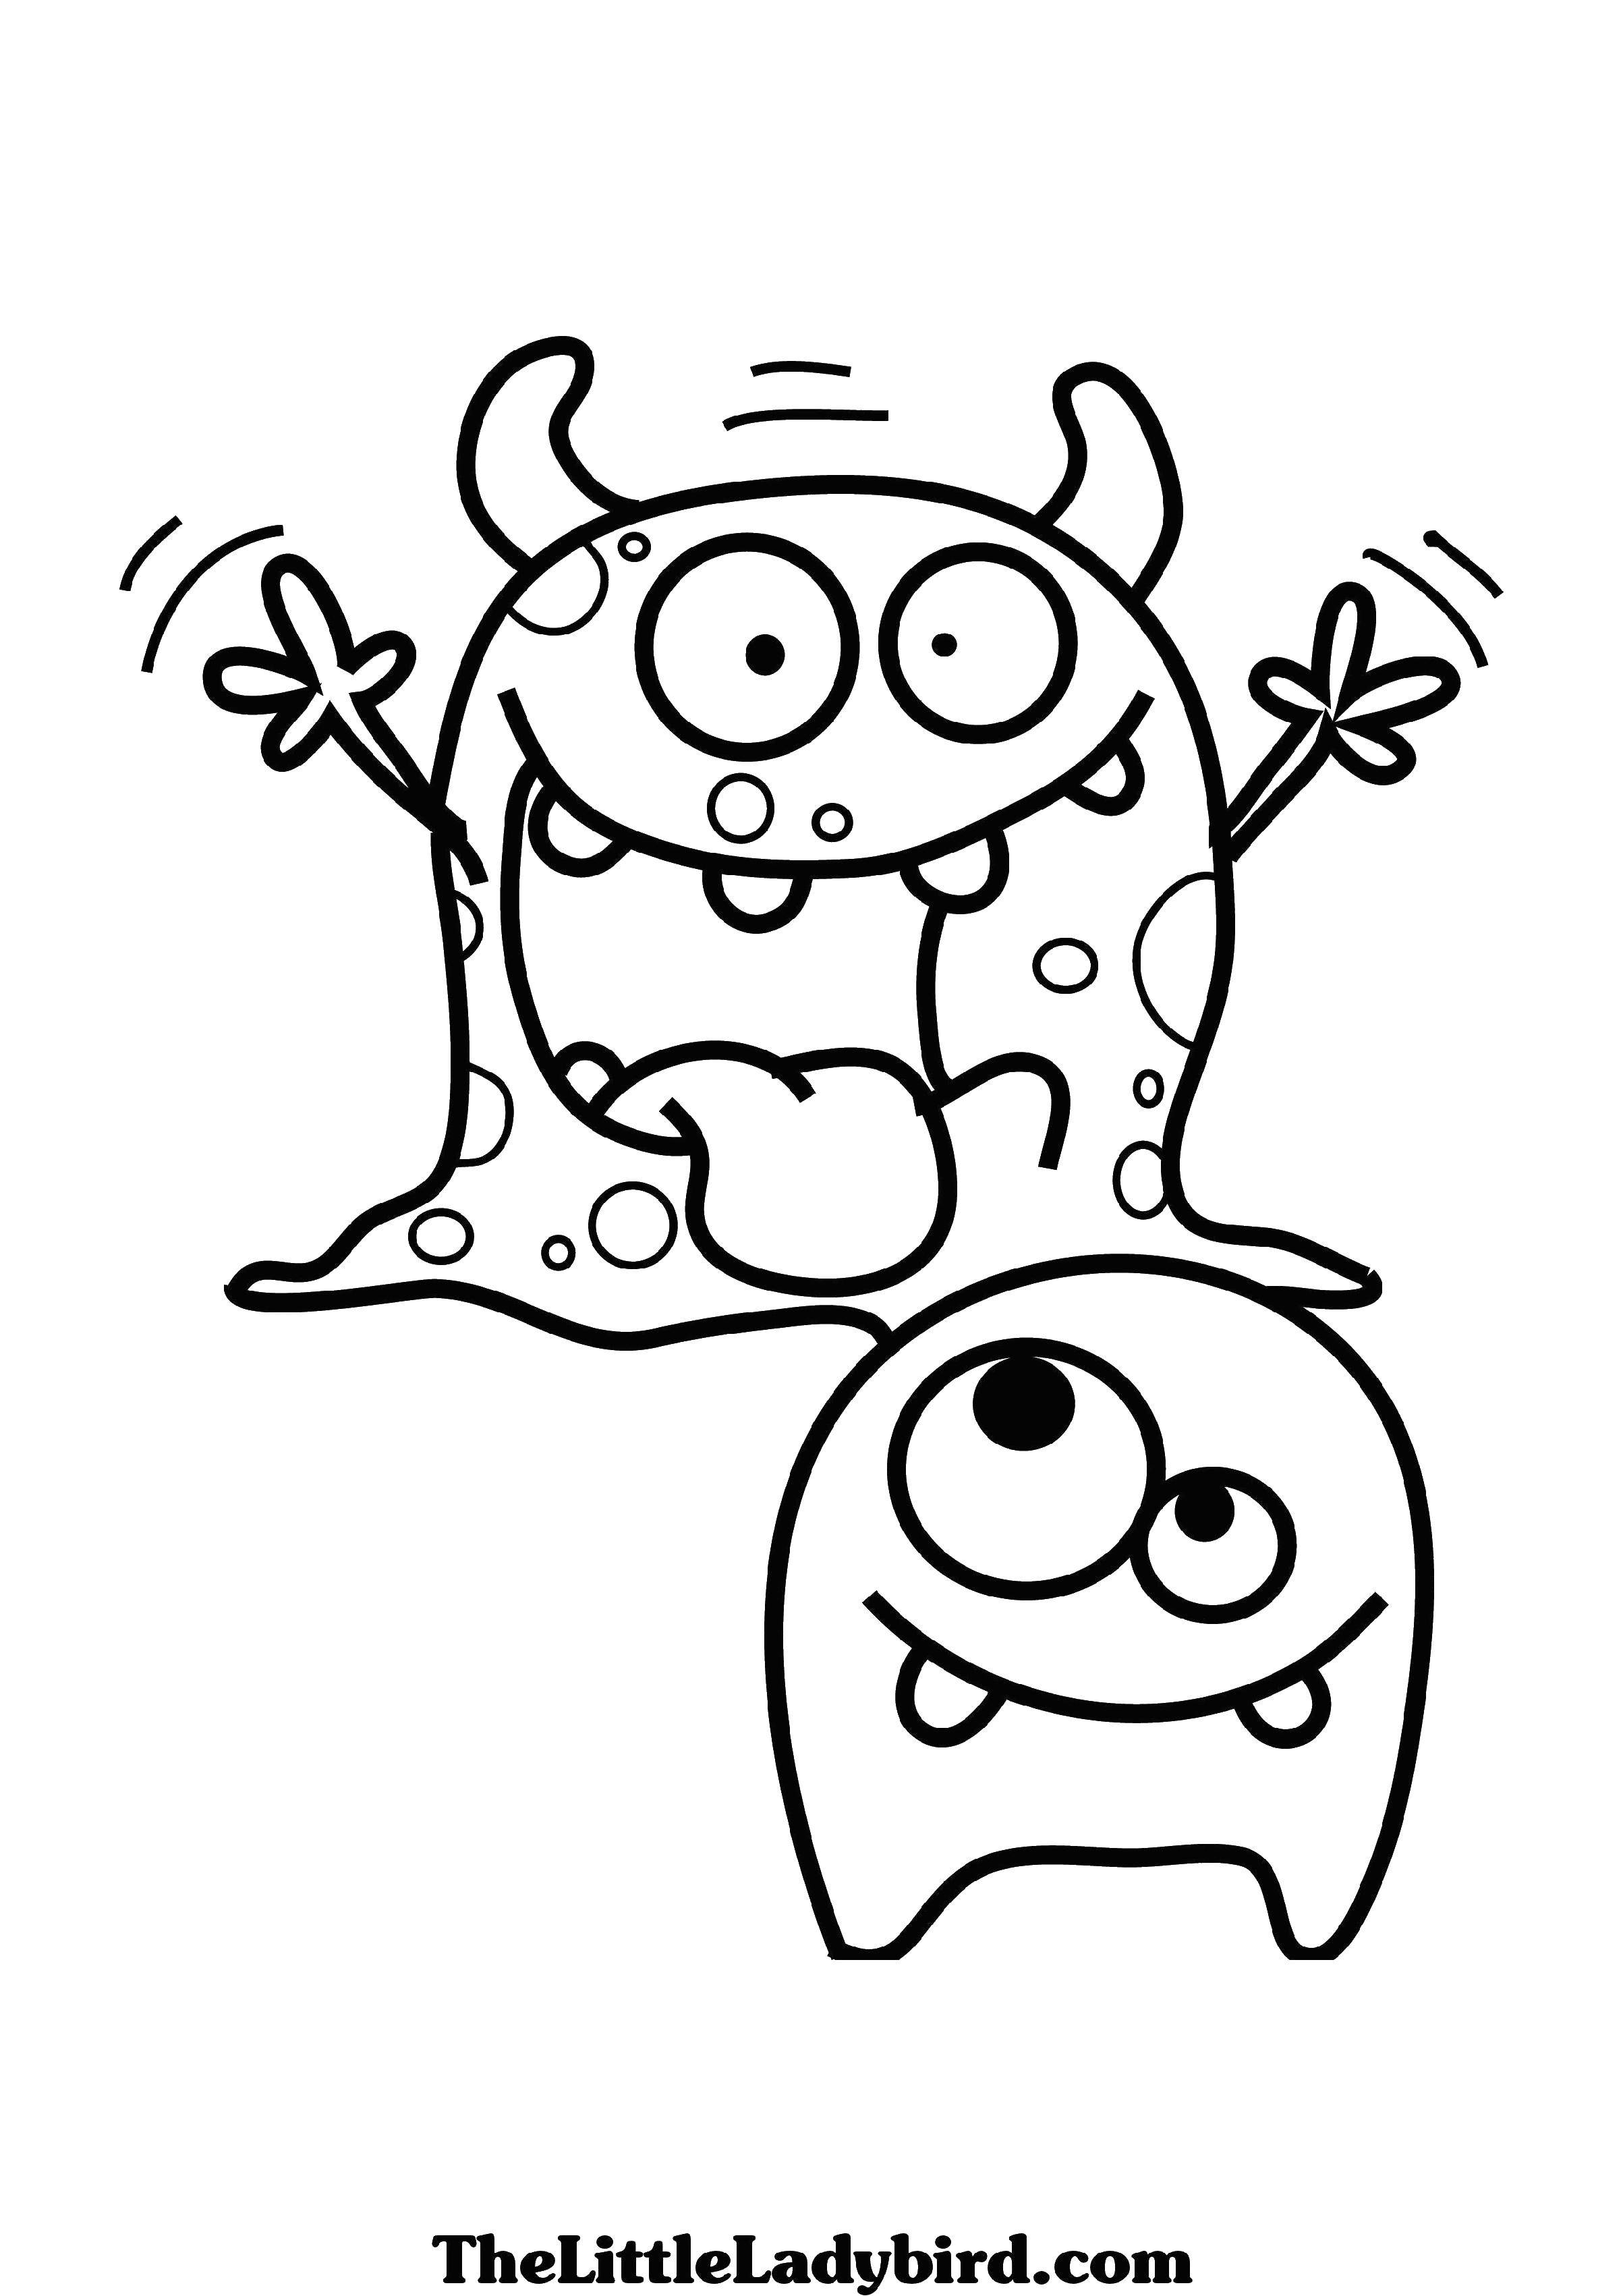 Coloring Two monster. Category Coloring pages monsters. Tags:  monsters, jelly, horns.